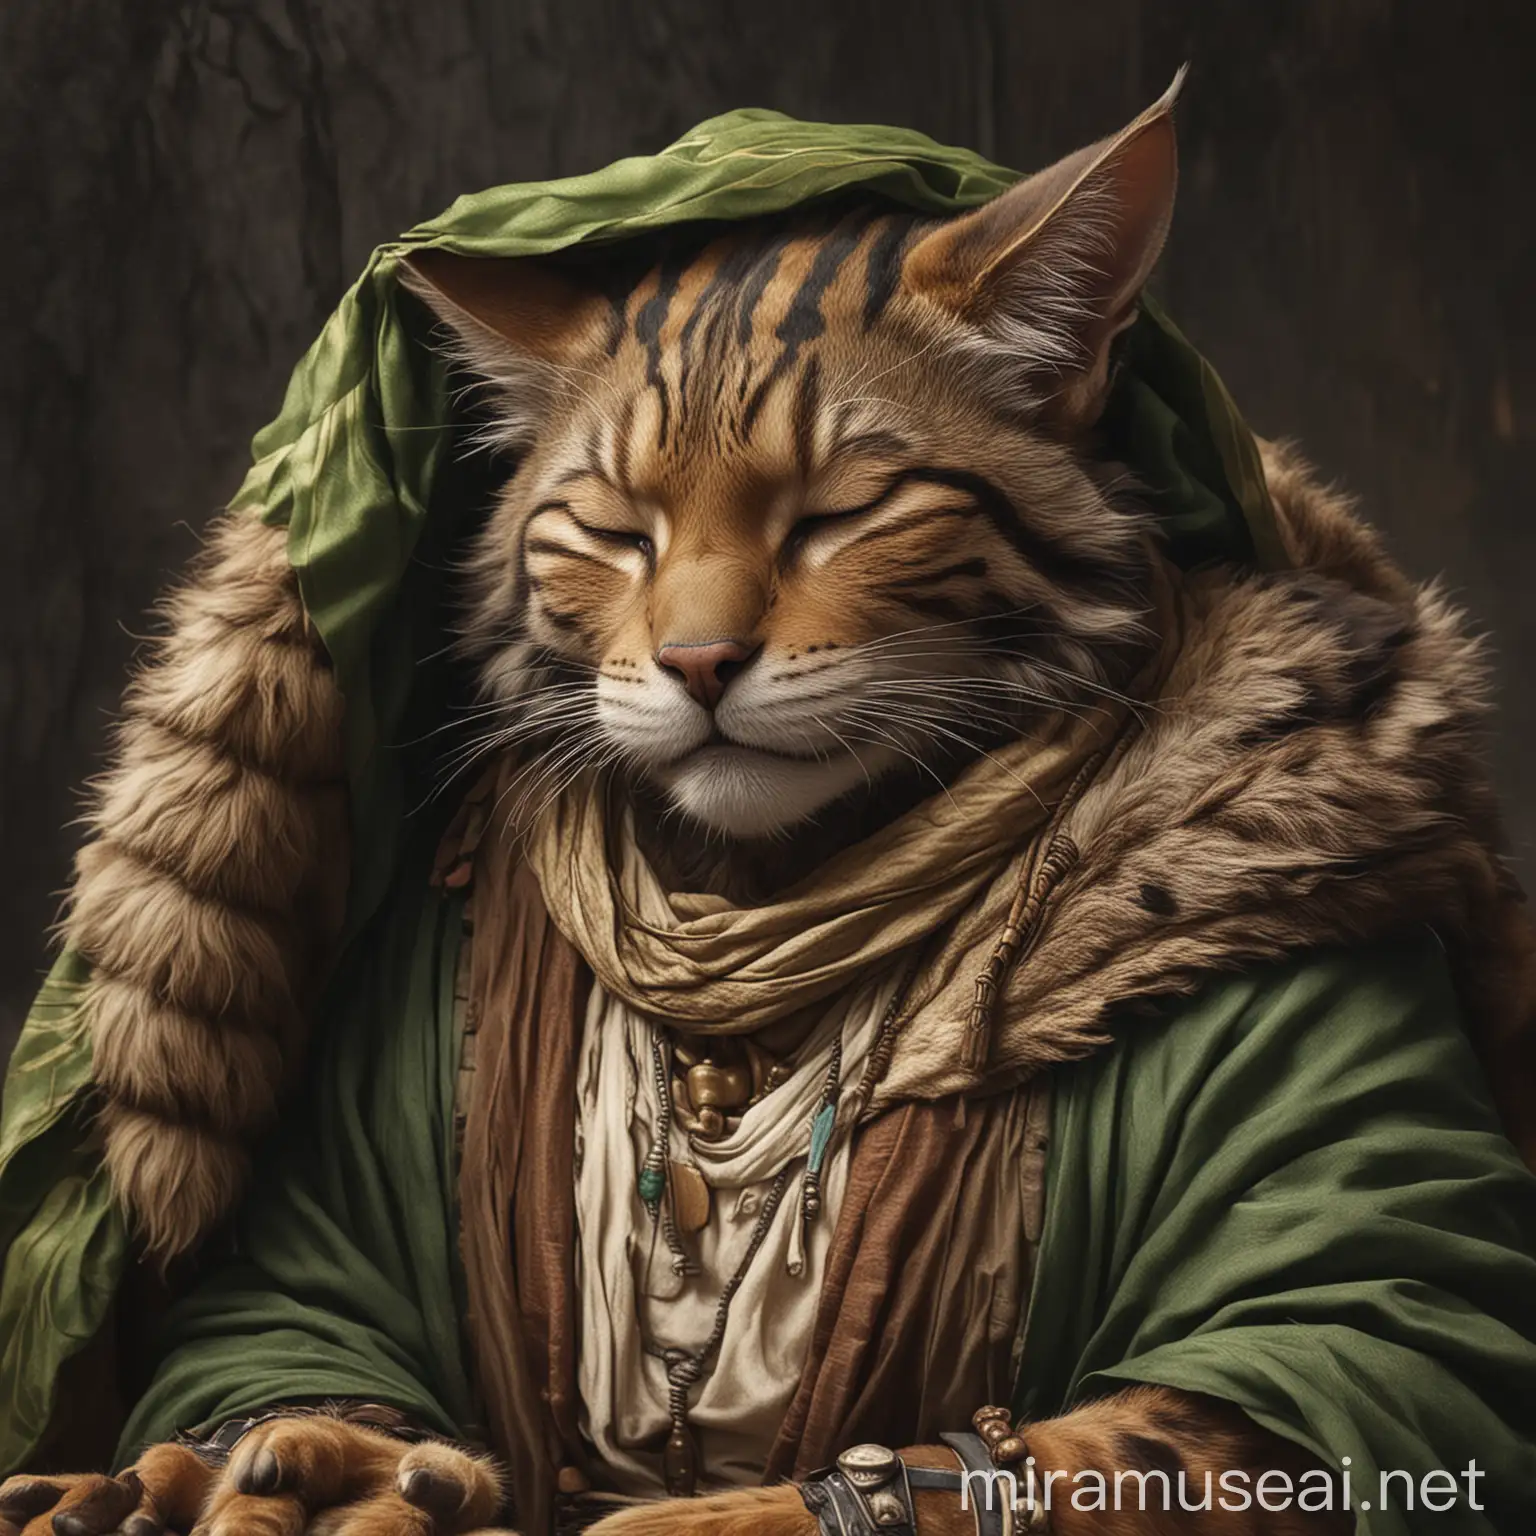 Tranquil Tabaxi Druid Resting in the Moonlight